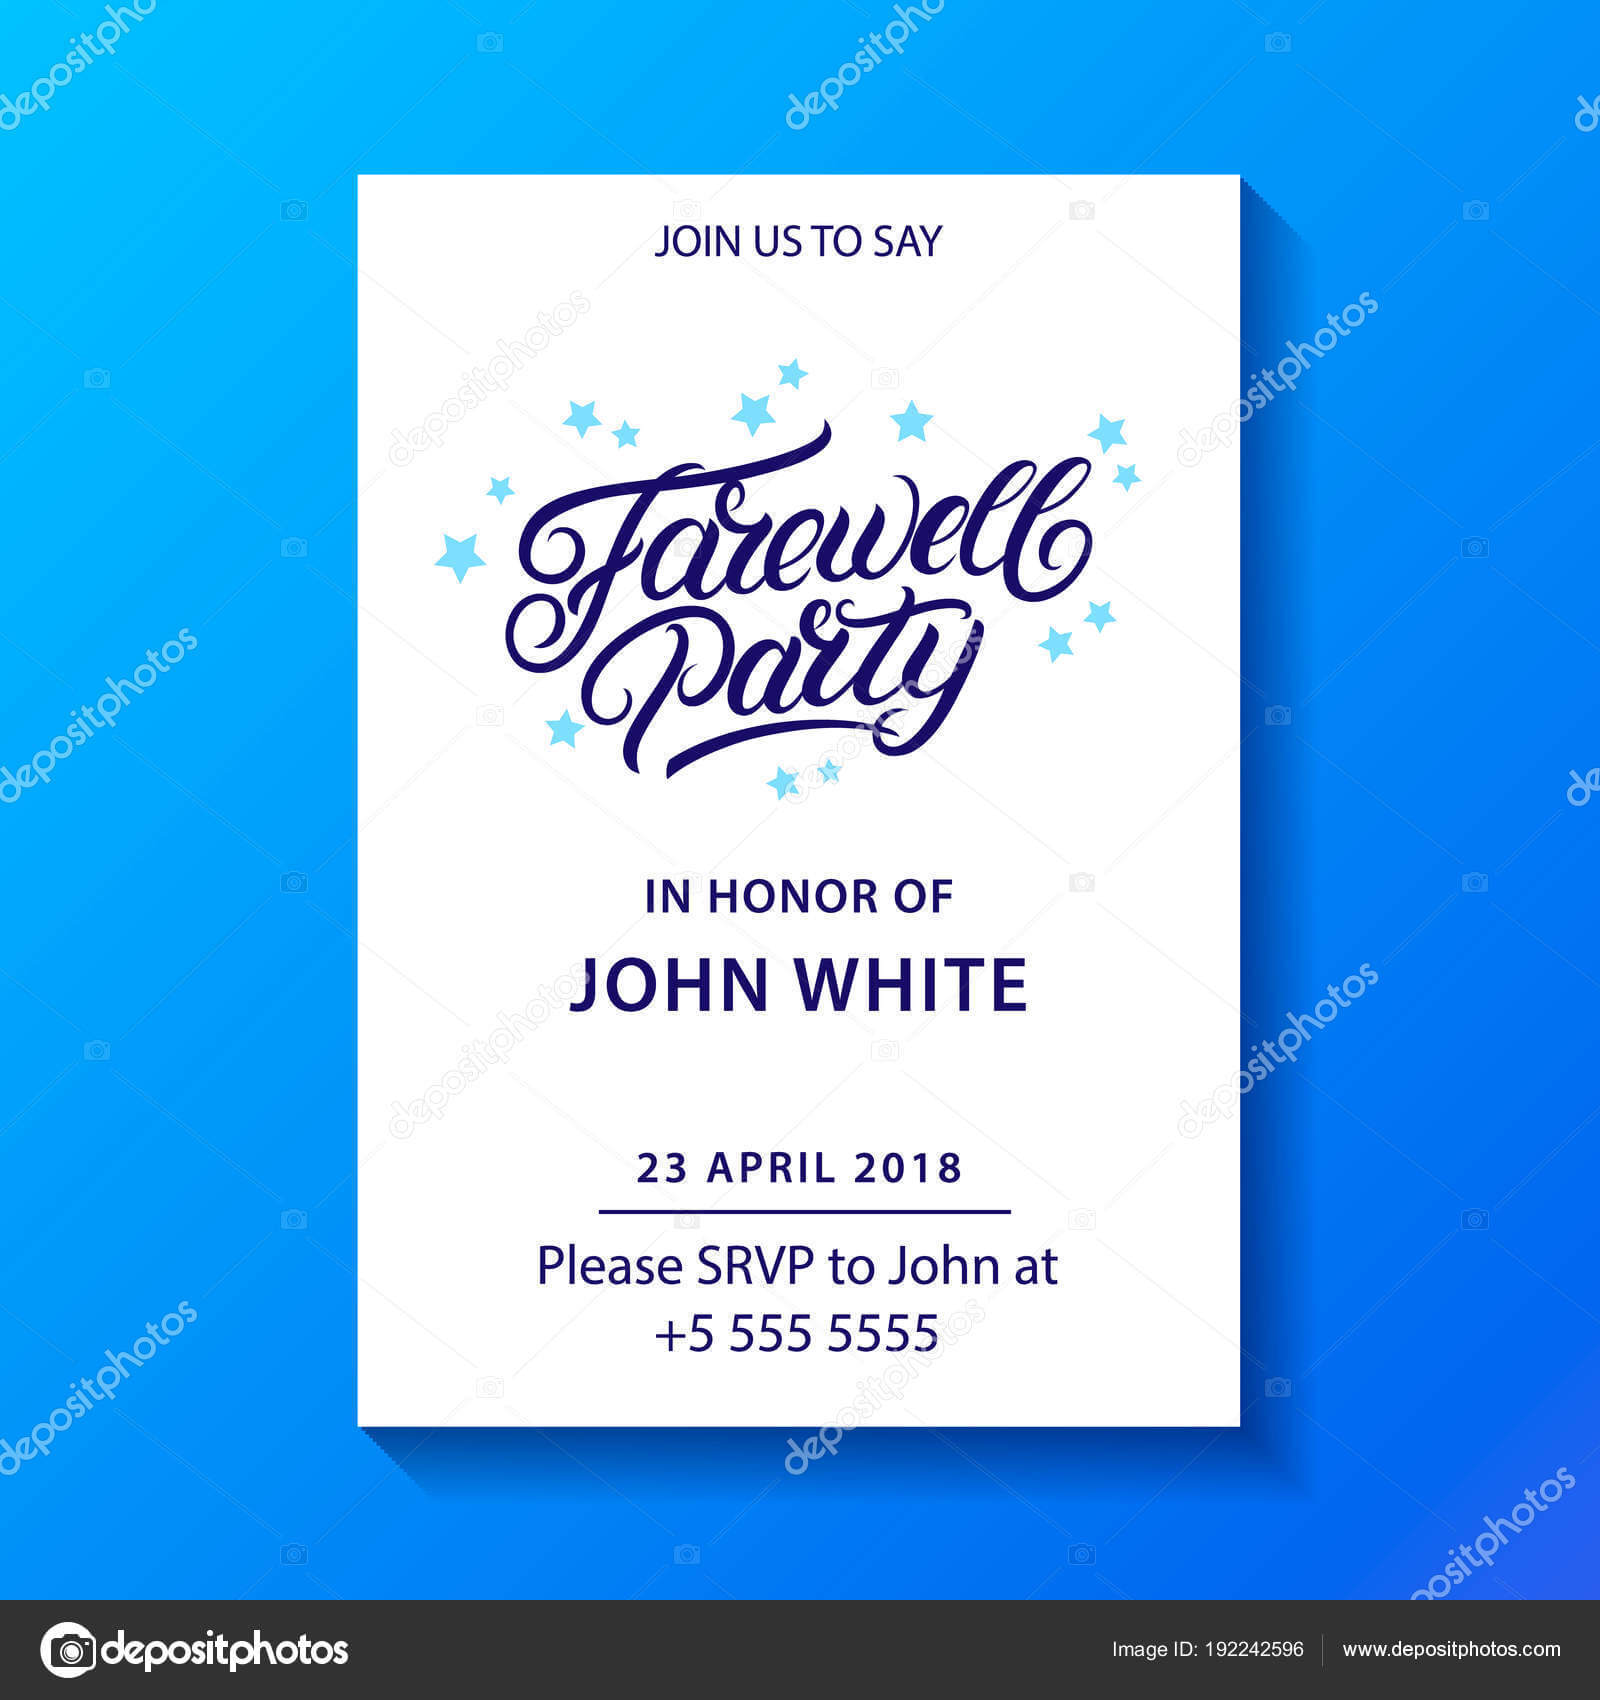 ᐈ We Will Miss You Banners Stock Images, Royalty Free Inside Farewell Invitation Card Template